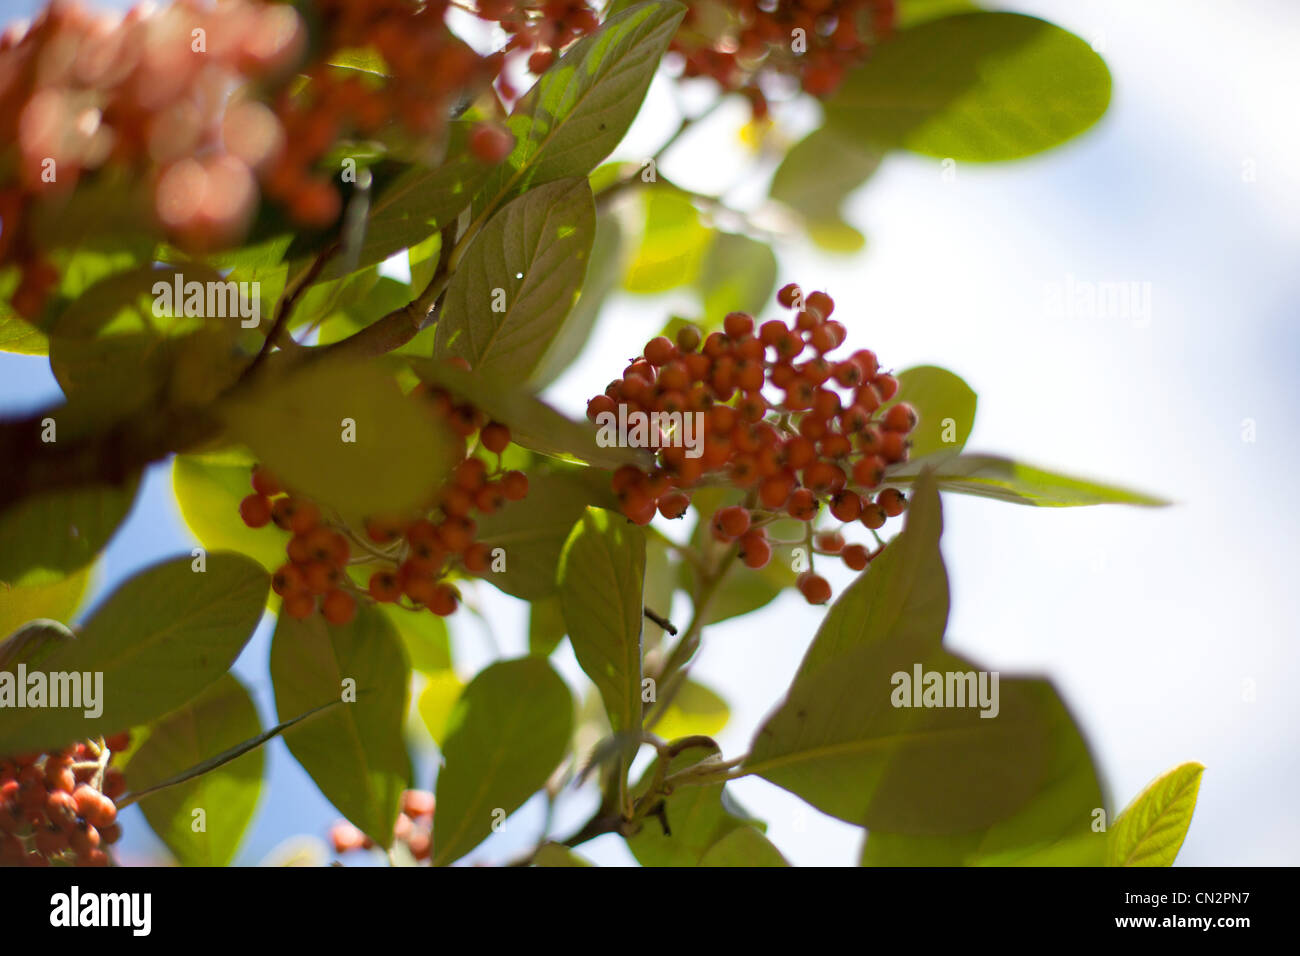 Berries and leaves, close up Stock Photo